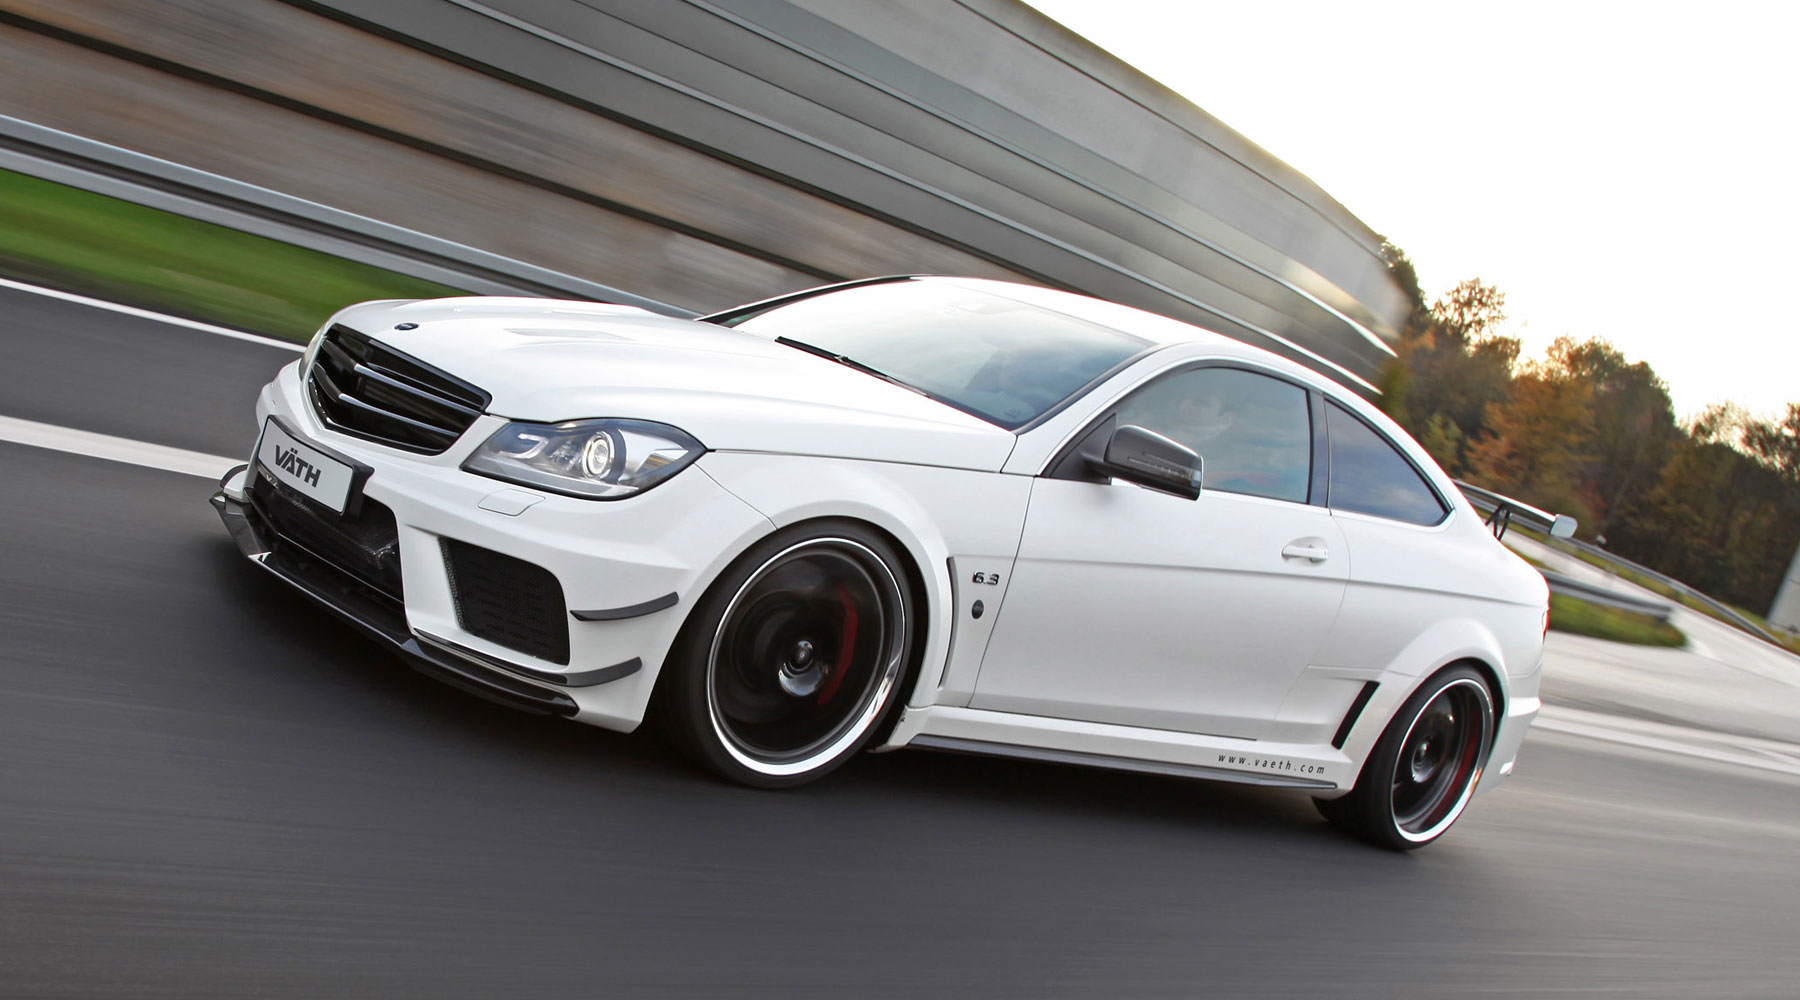 Mercedes-Benz C63 AMG Coupe Black Series by Väth